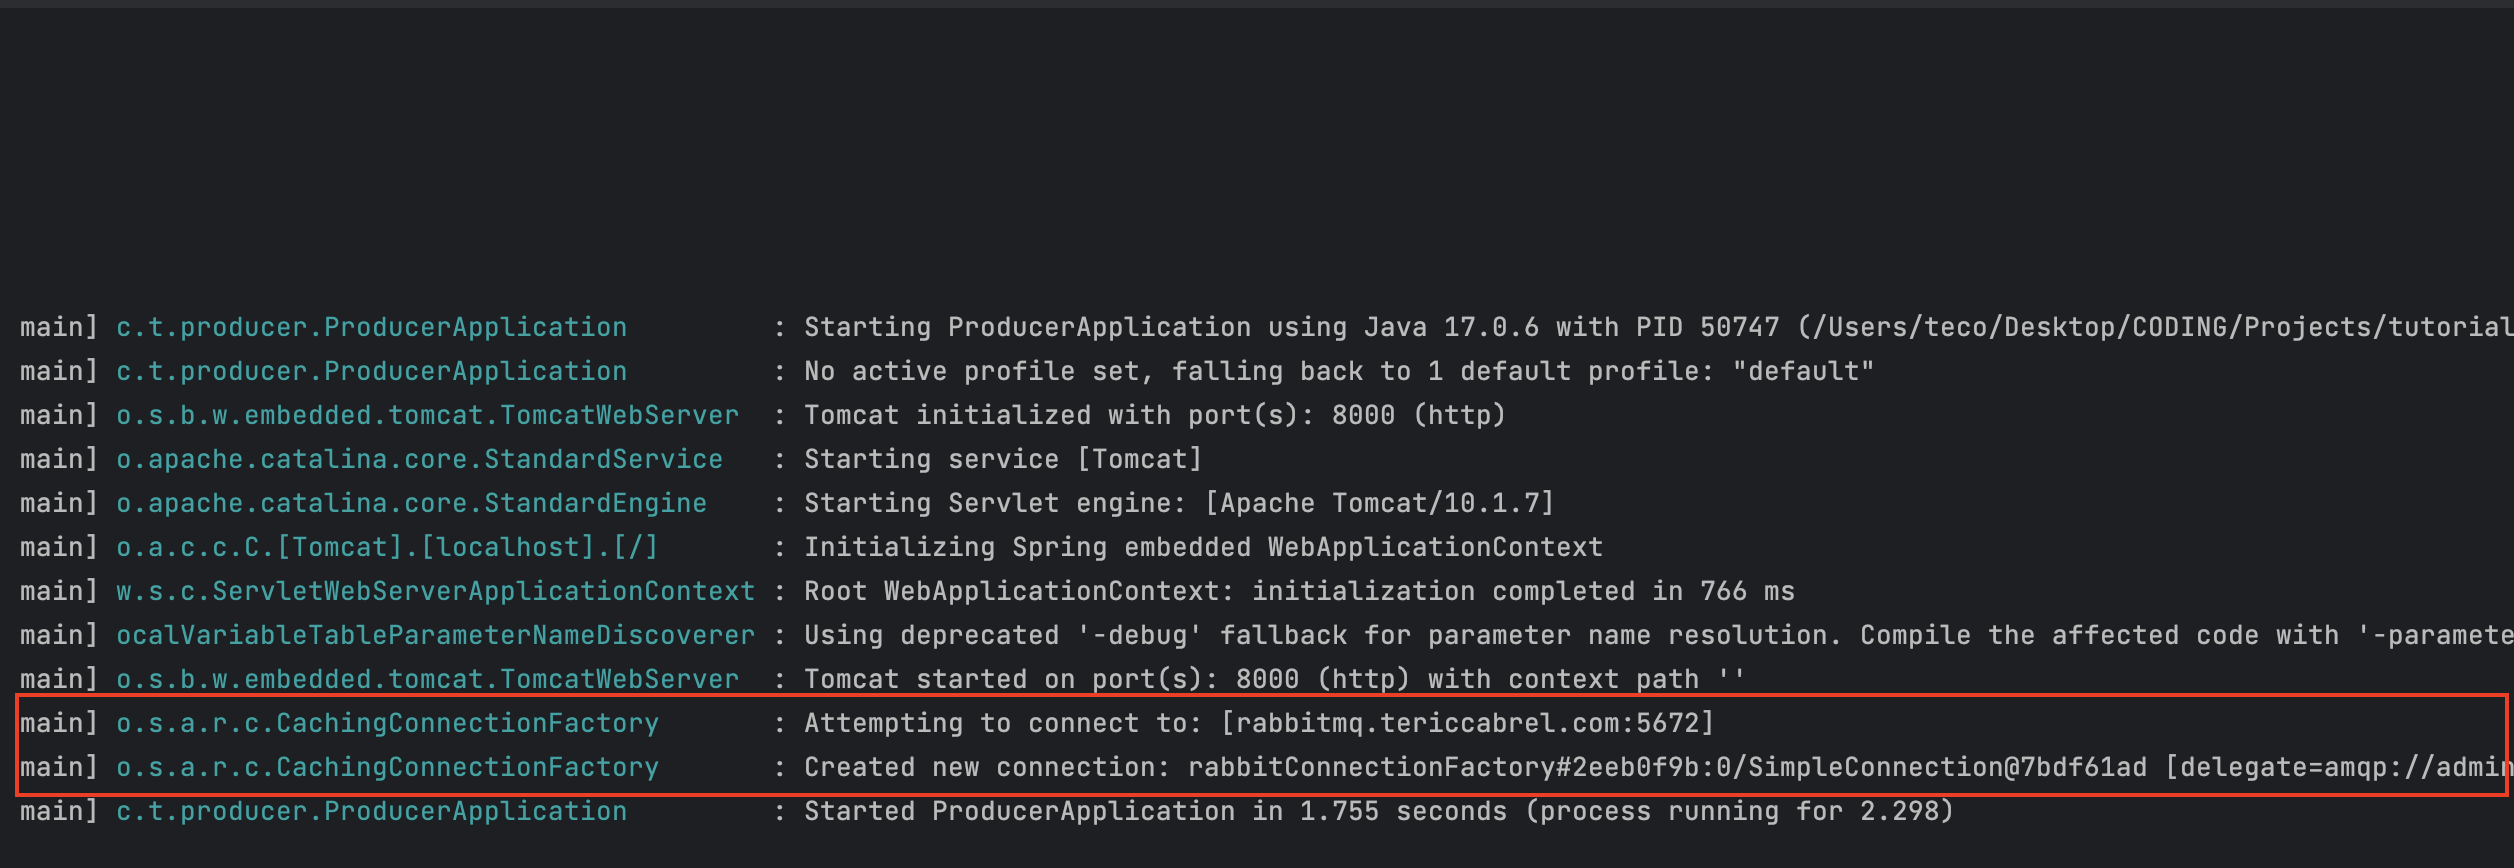 The Spring Boot application was successfully connected to the RabbitMQ server.